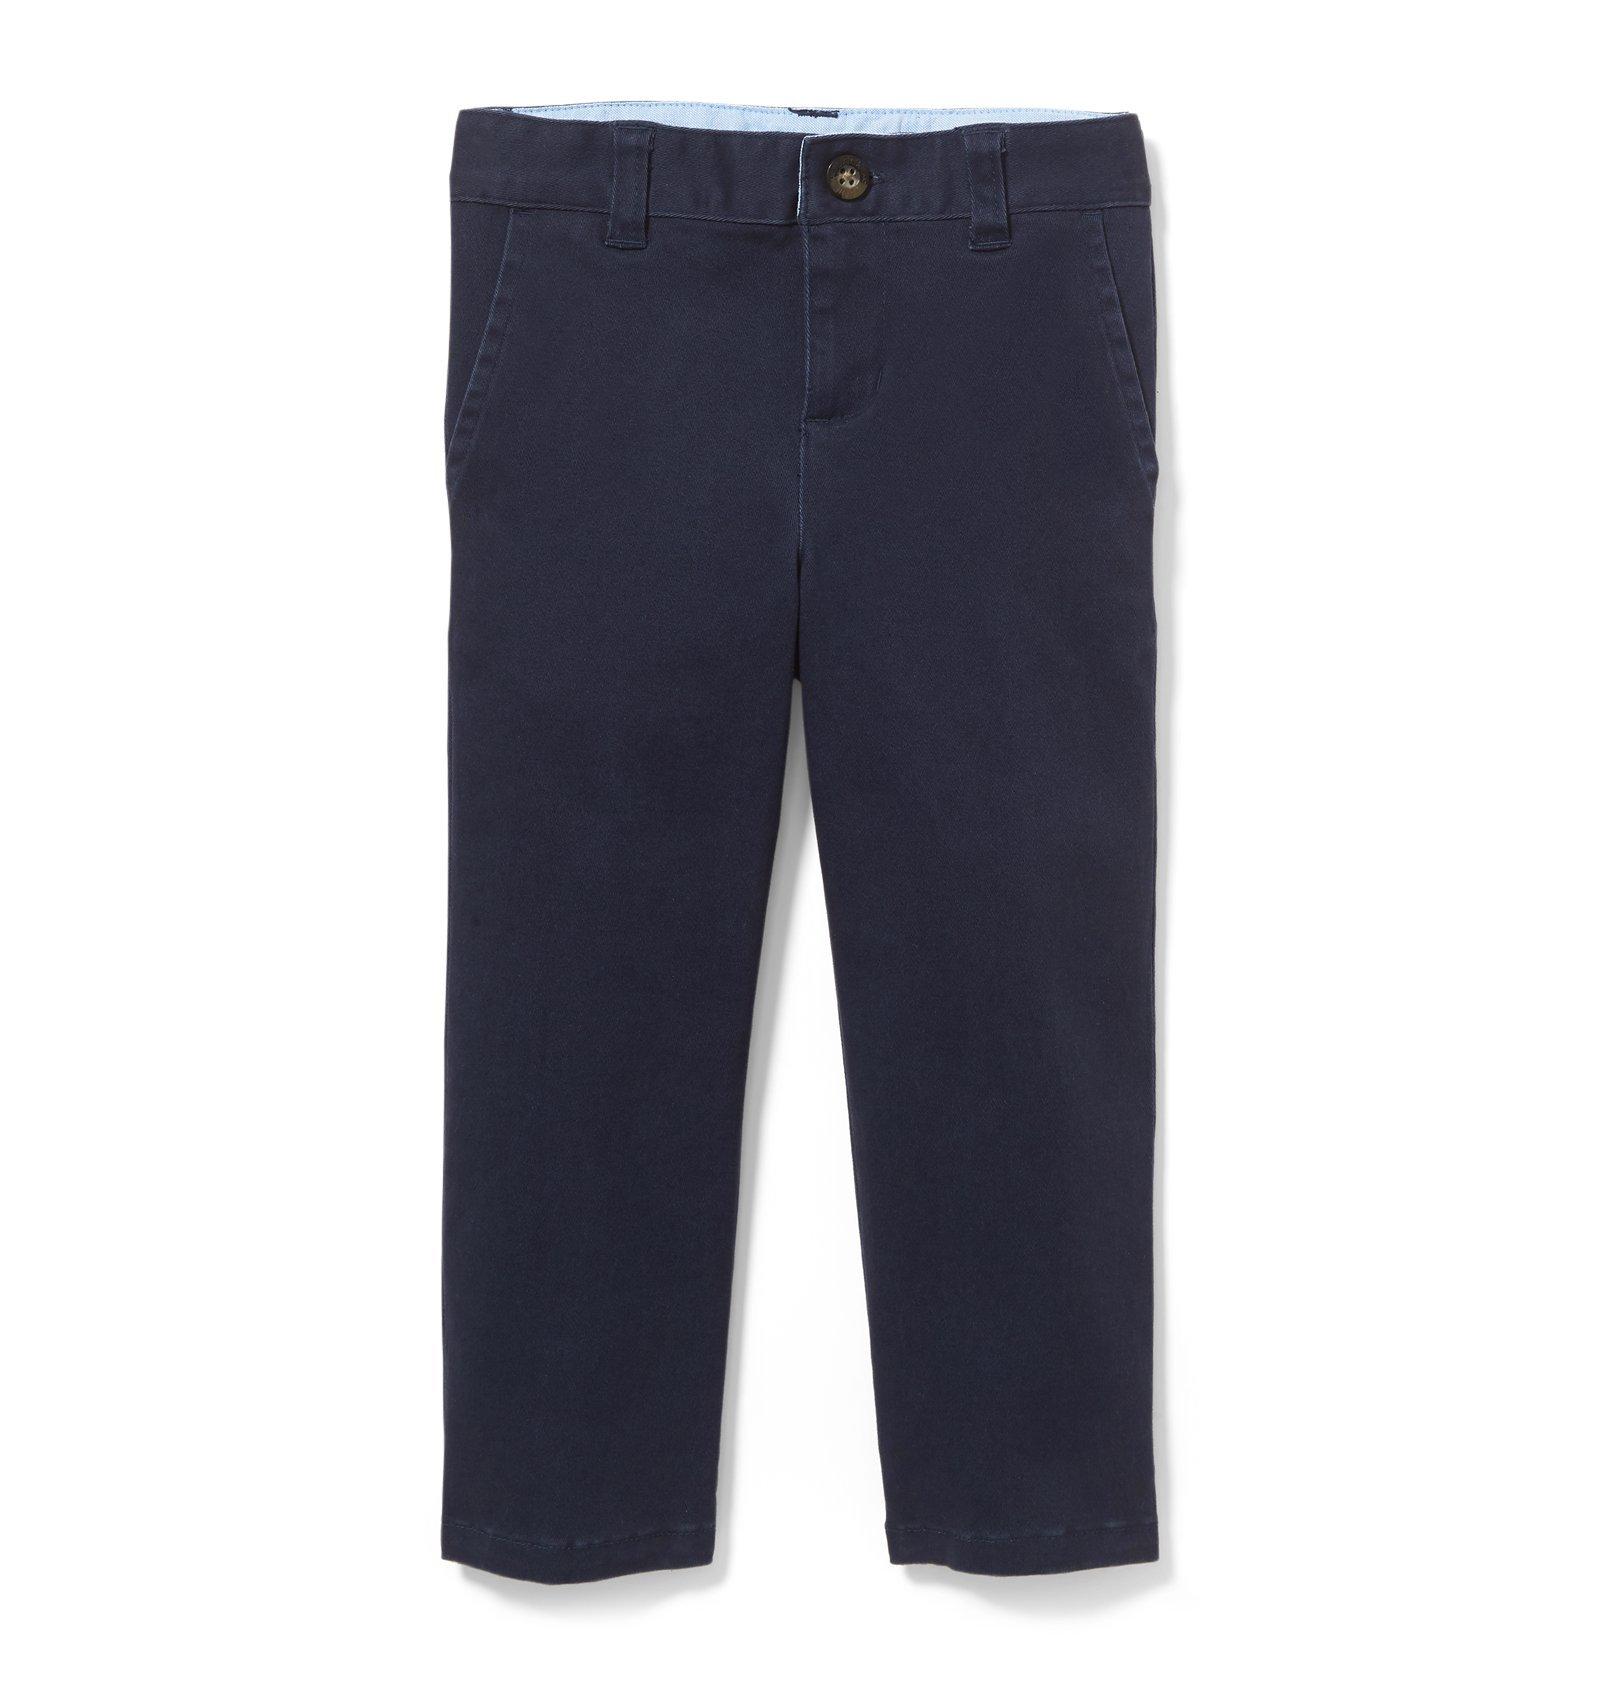 Boy Connor Navy Twill Stretch Pant by Janie and Jack